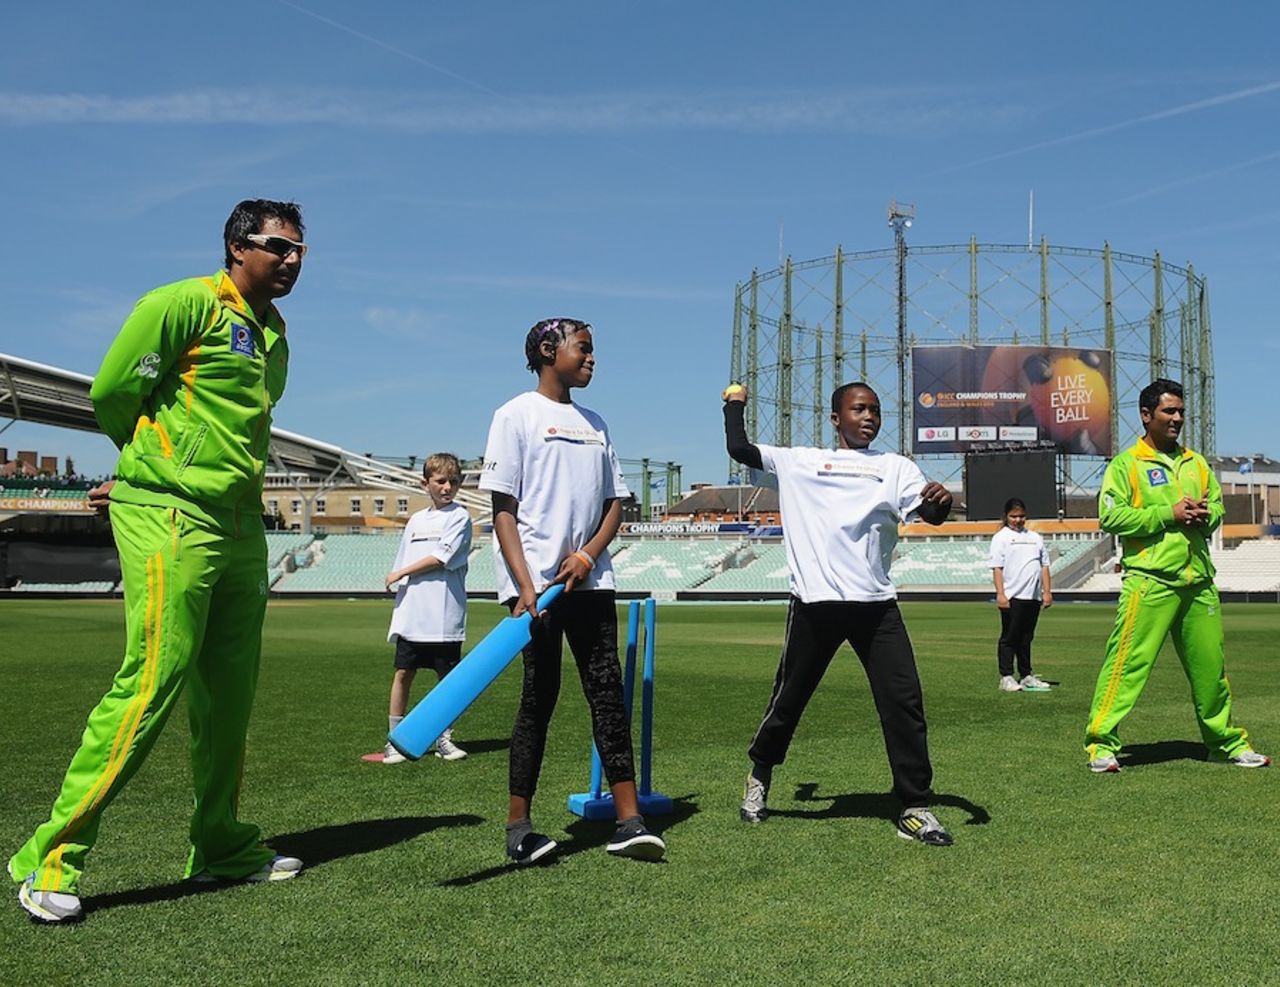 Nasir Jamshed and Asad Shafiq spend a day with school children, The Oval, London, June 4, 2013